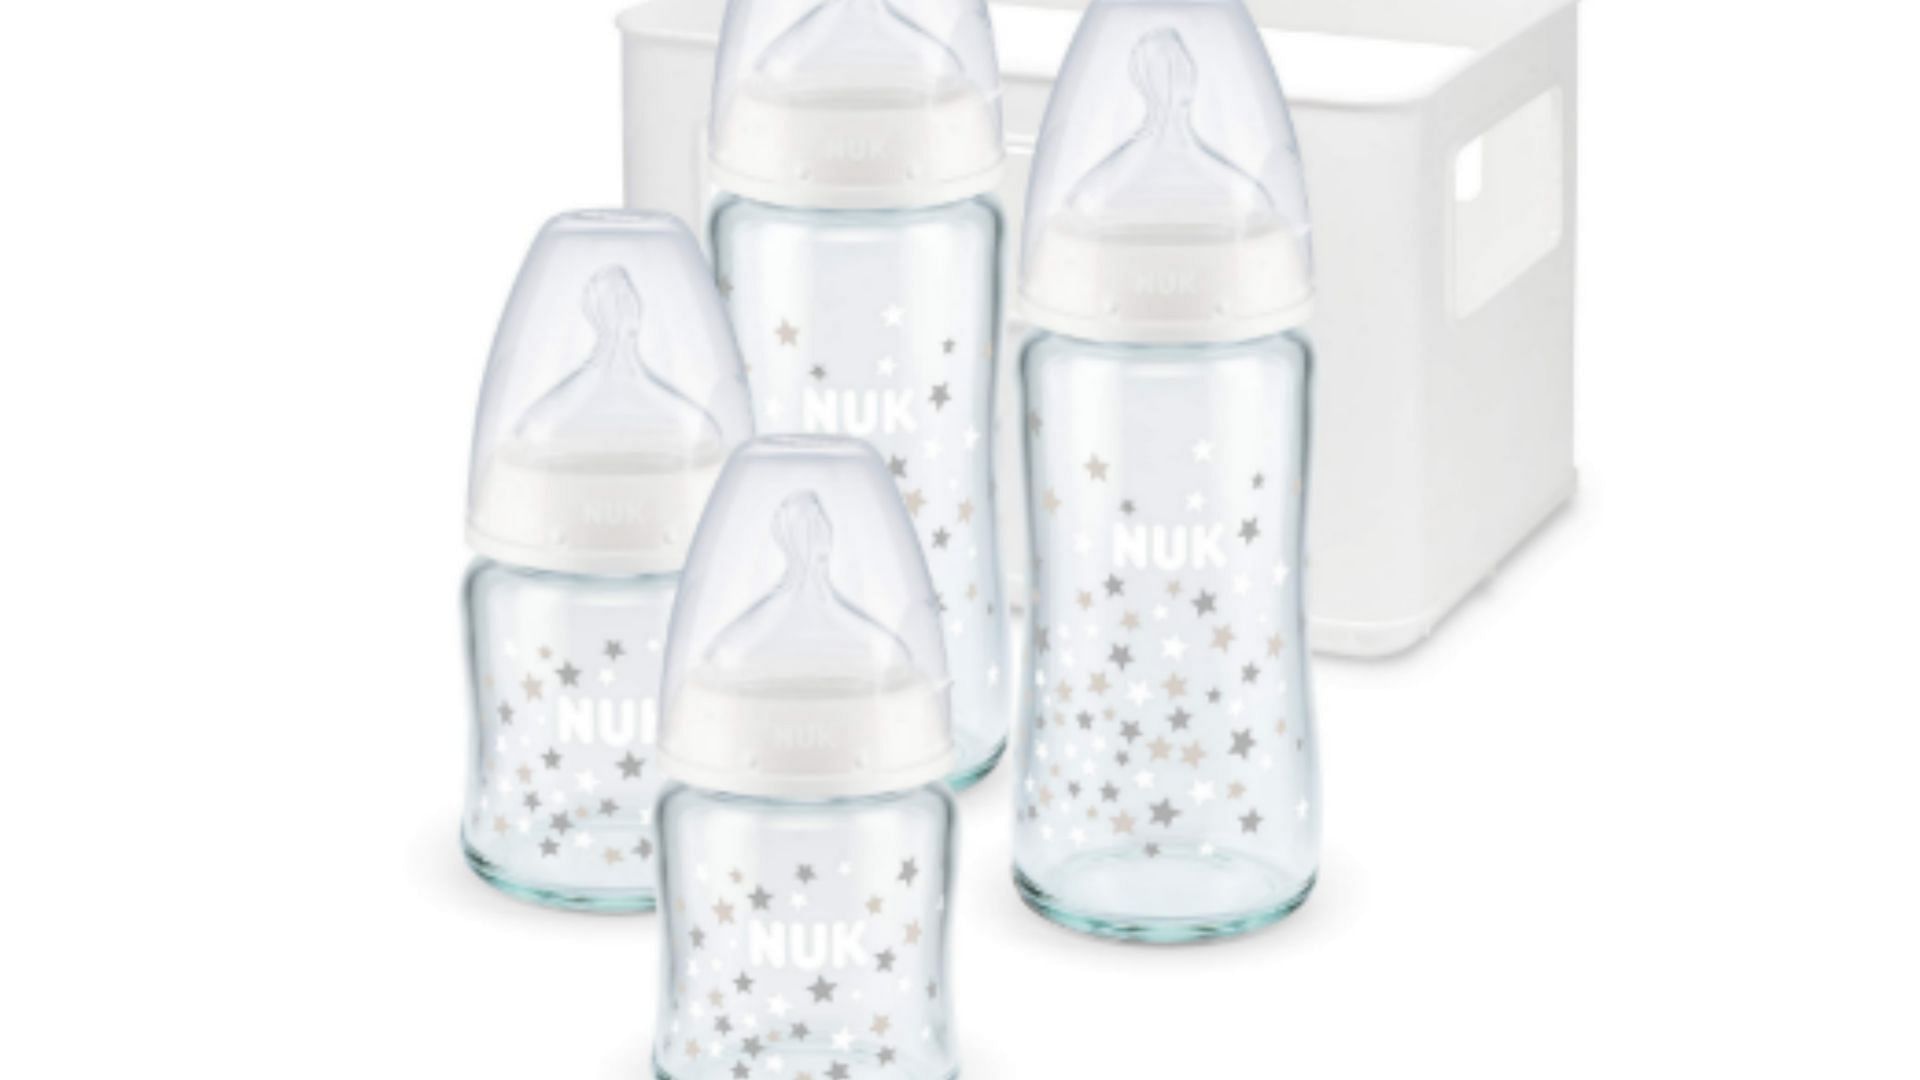 Nuk baby bottle recall All you need to know amid lead level concerns